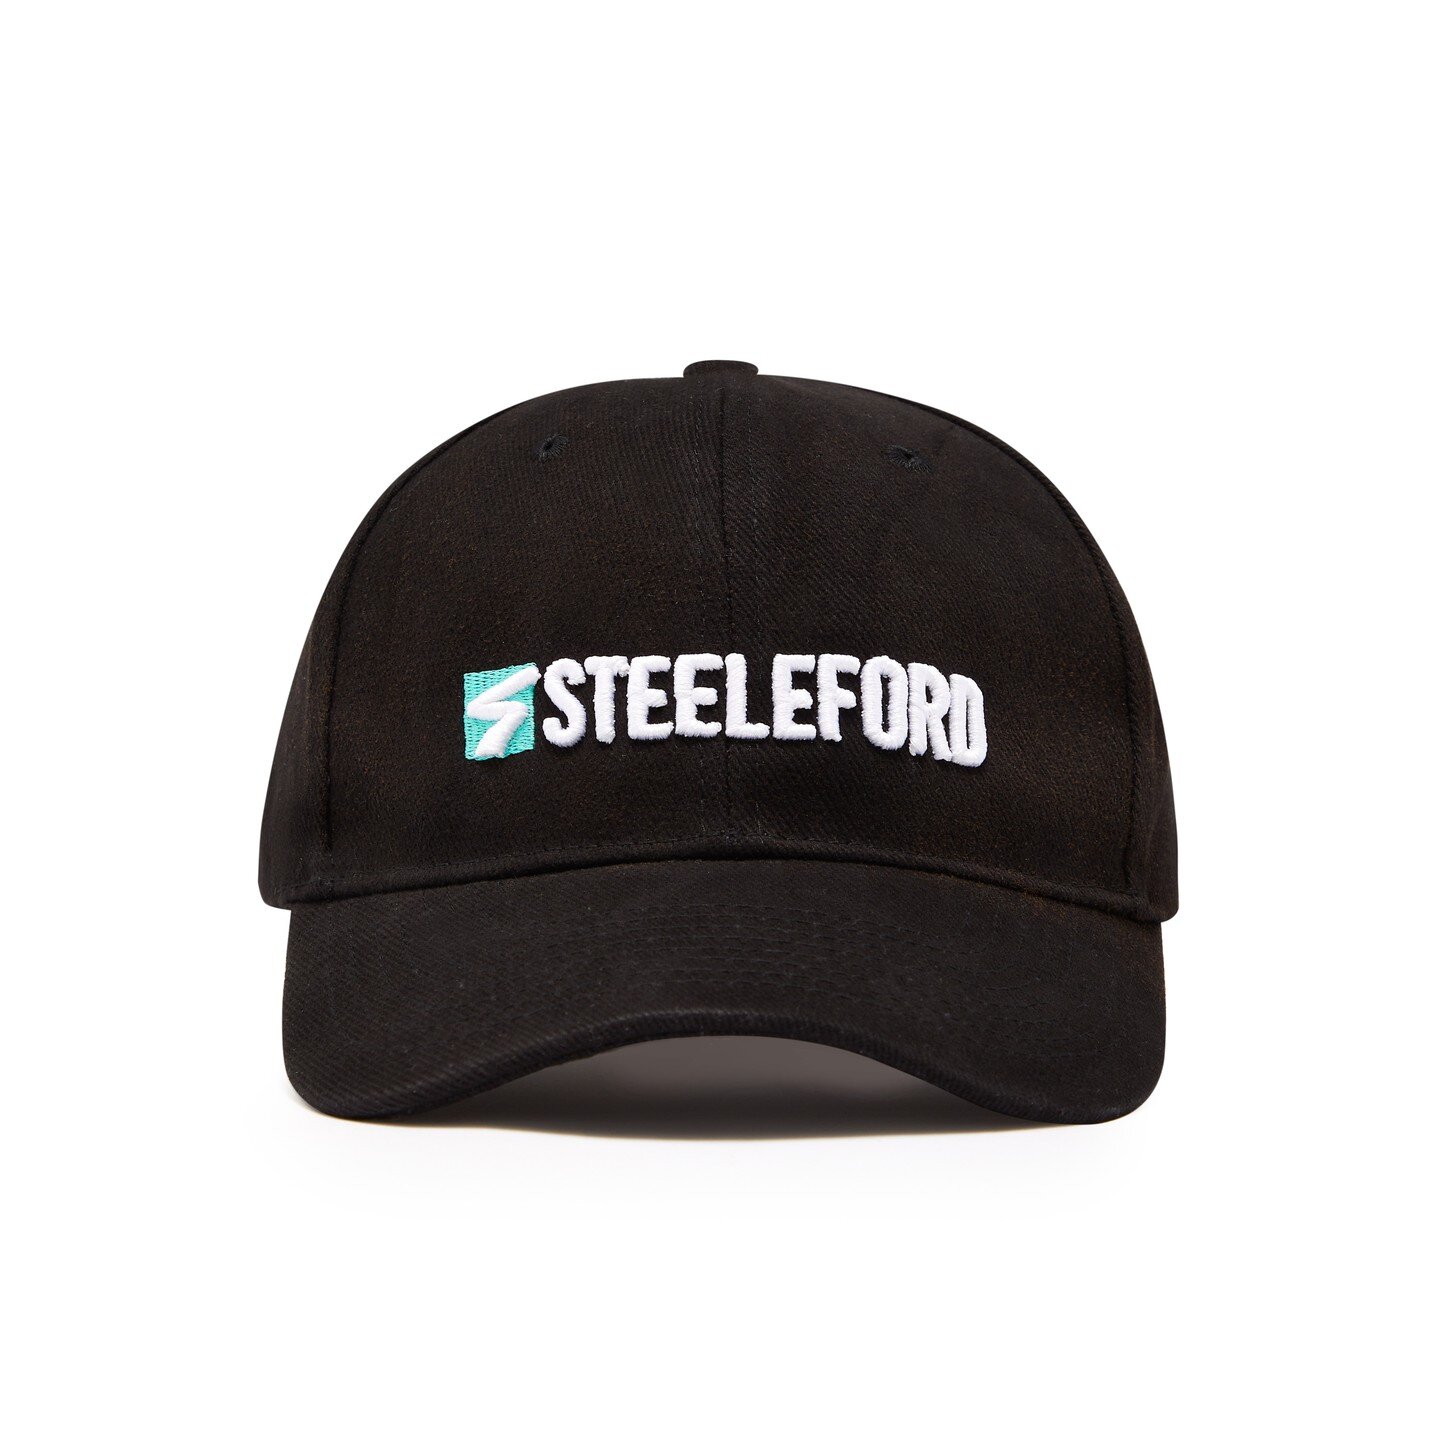 Our Steeleford caps are now live!

Available in two colours and are perfect for keeping the sun off your heads at one of our events this year! 🌞

There are only a limited number of these available so head to www.steeleford.co.uk/shop and grab yours 